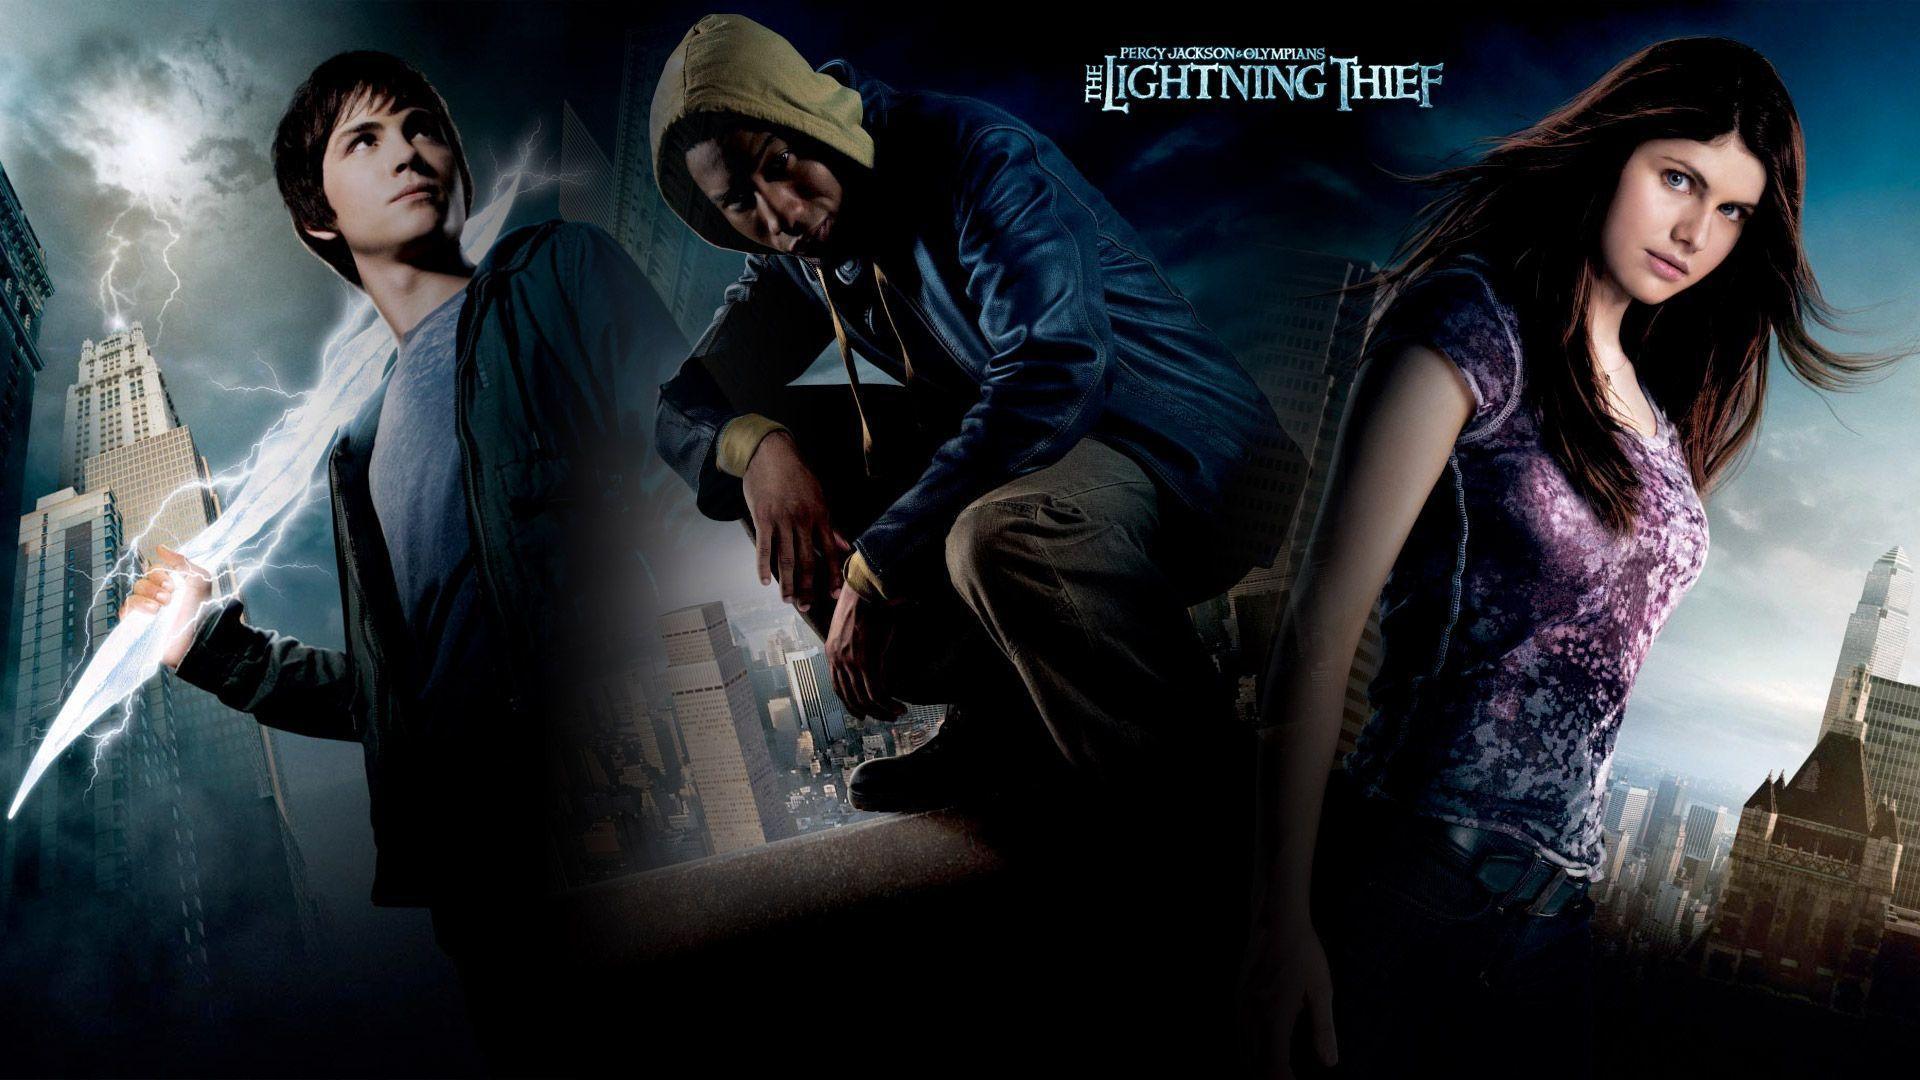 Percy Jackson And The Olympians (The Lightning Thief) HD Wallpaper